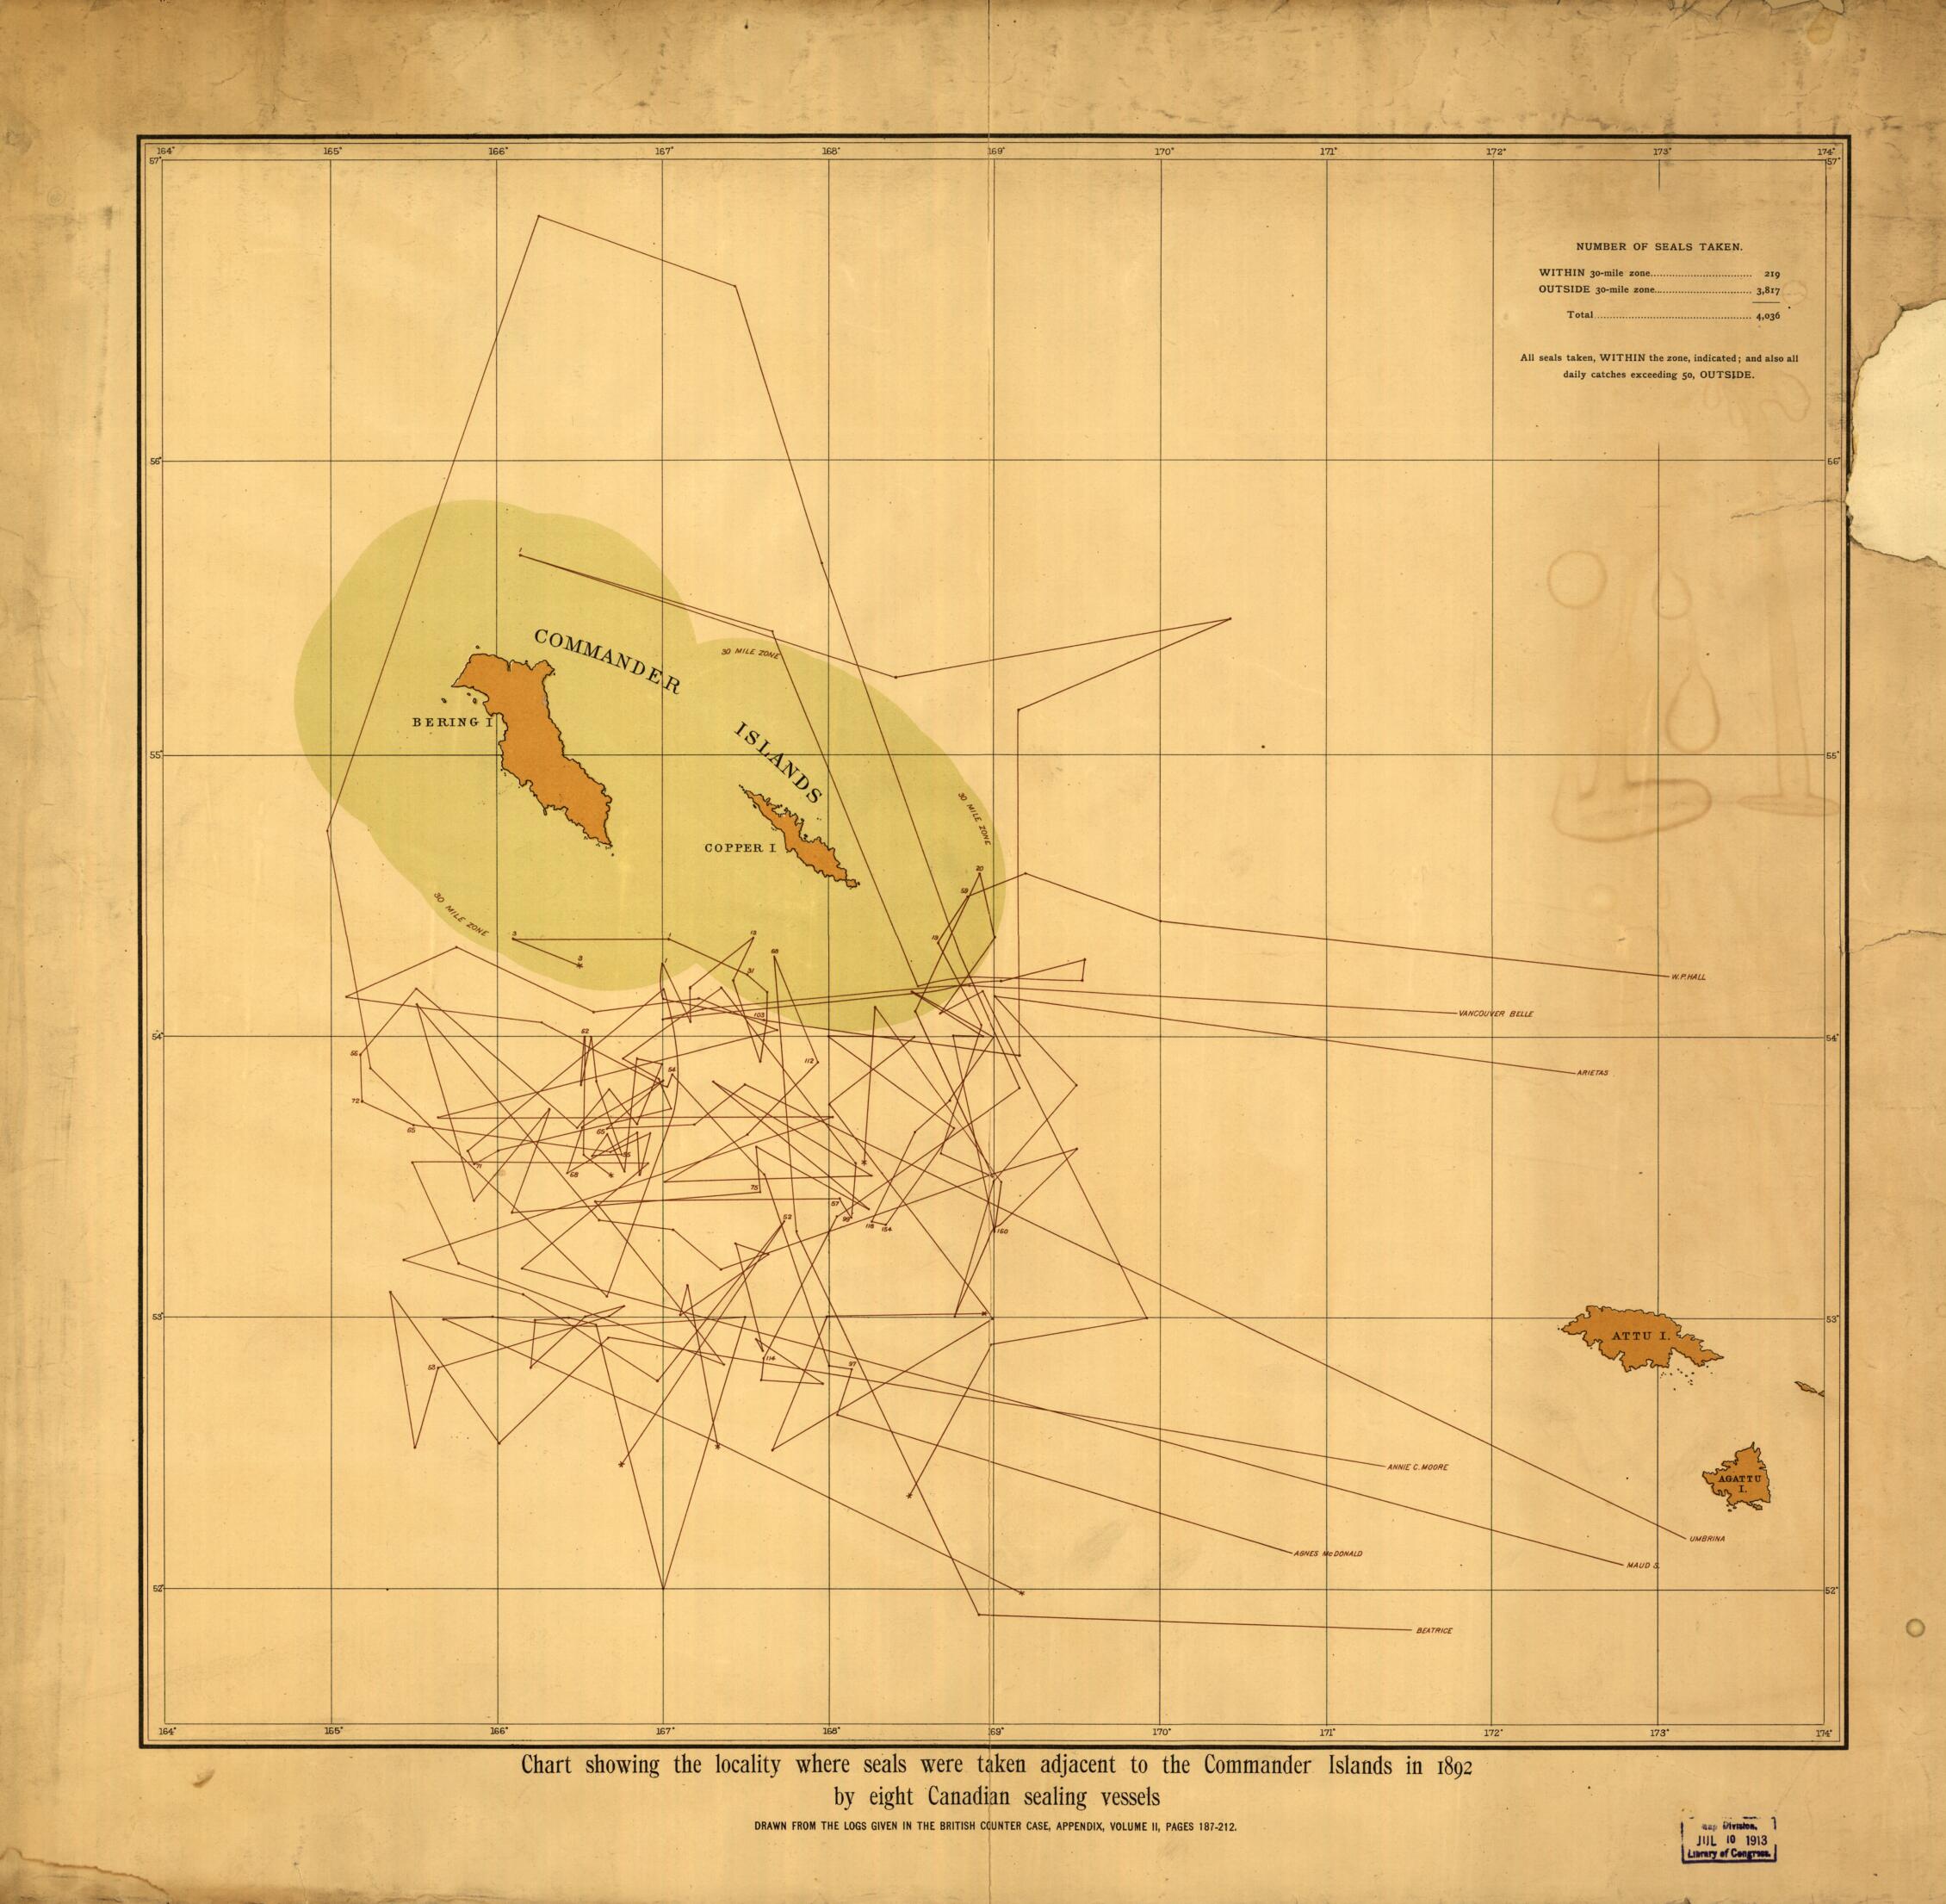 This old map of Chart Showing the Locality Where Seals Were Taken Adjacent to the Commander Islands In from 1892 by Eight Canadian Sealing Vessels was created by  in 1892